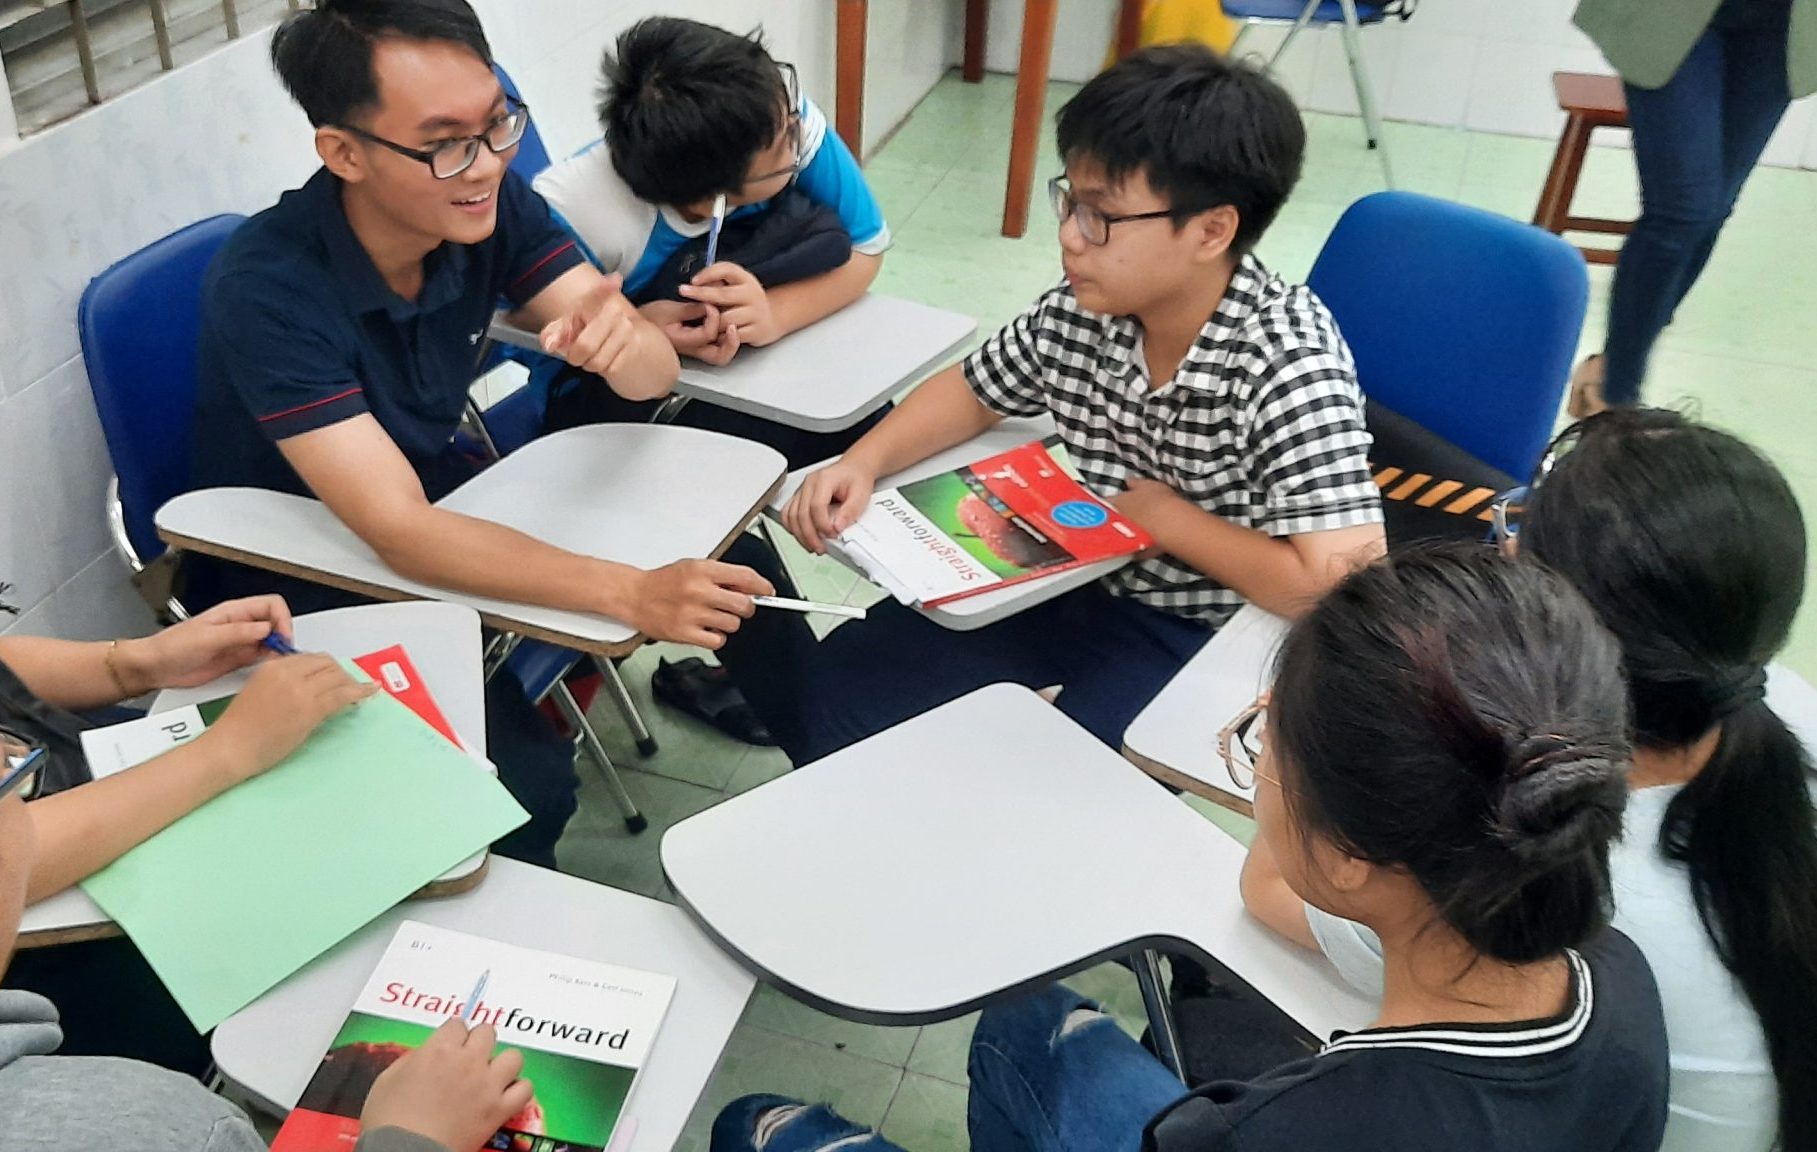 “I’m glad that I am able to study at Thang Long – whether it be face-to-face or online” – Pham Dinh Thinh